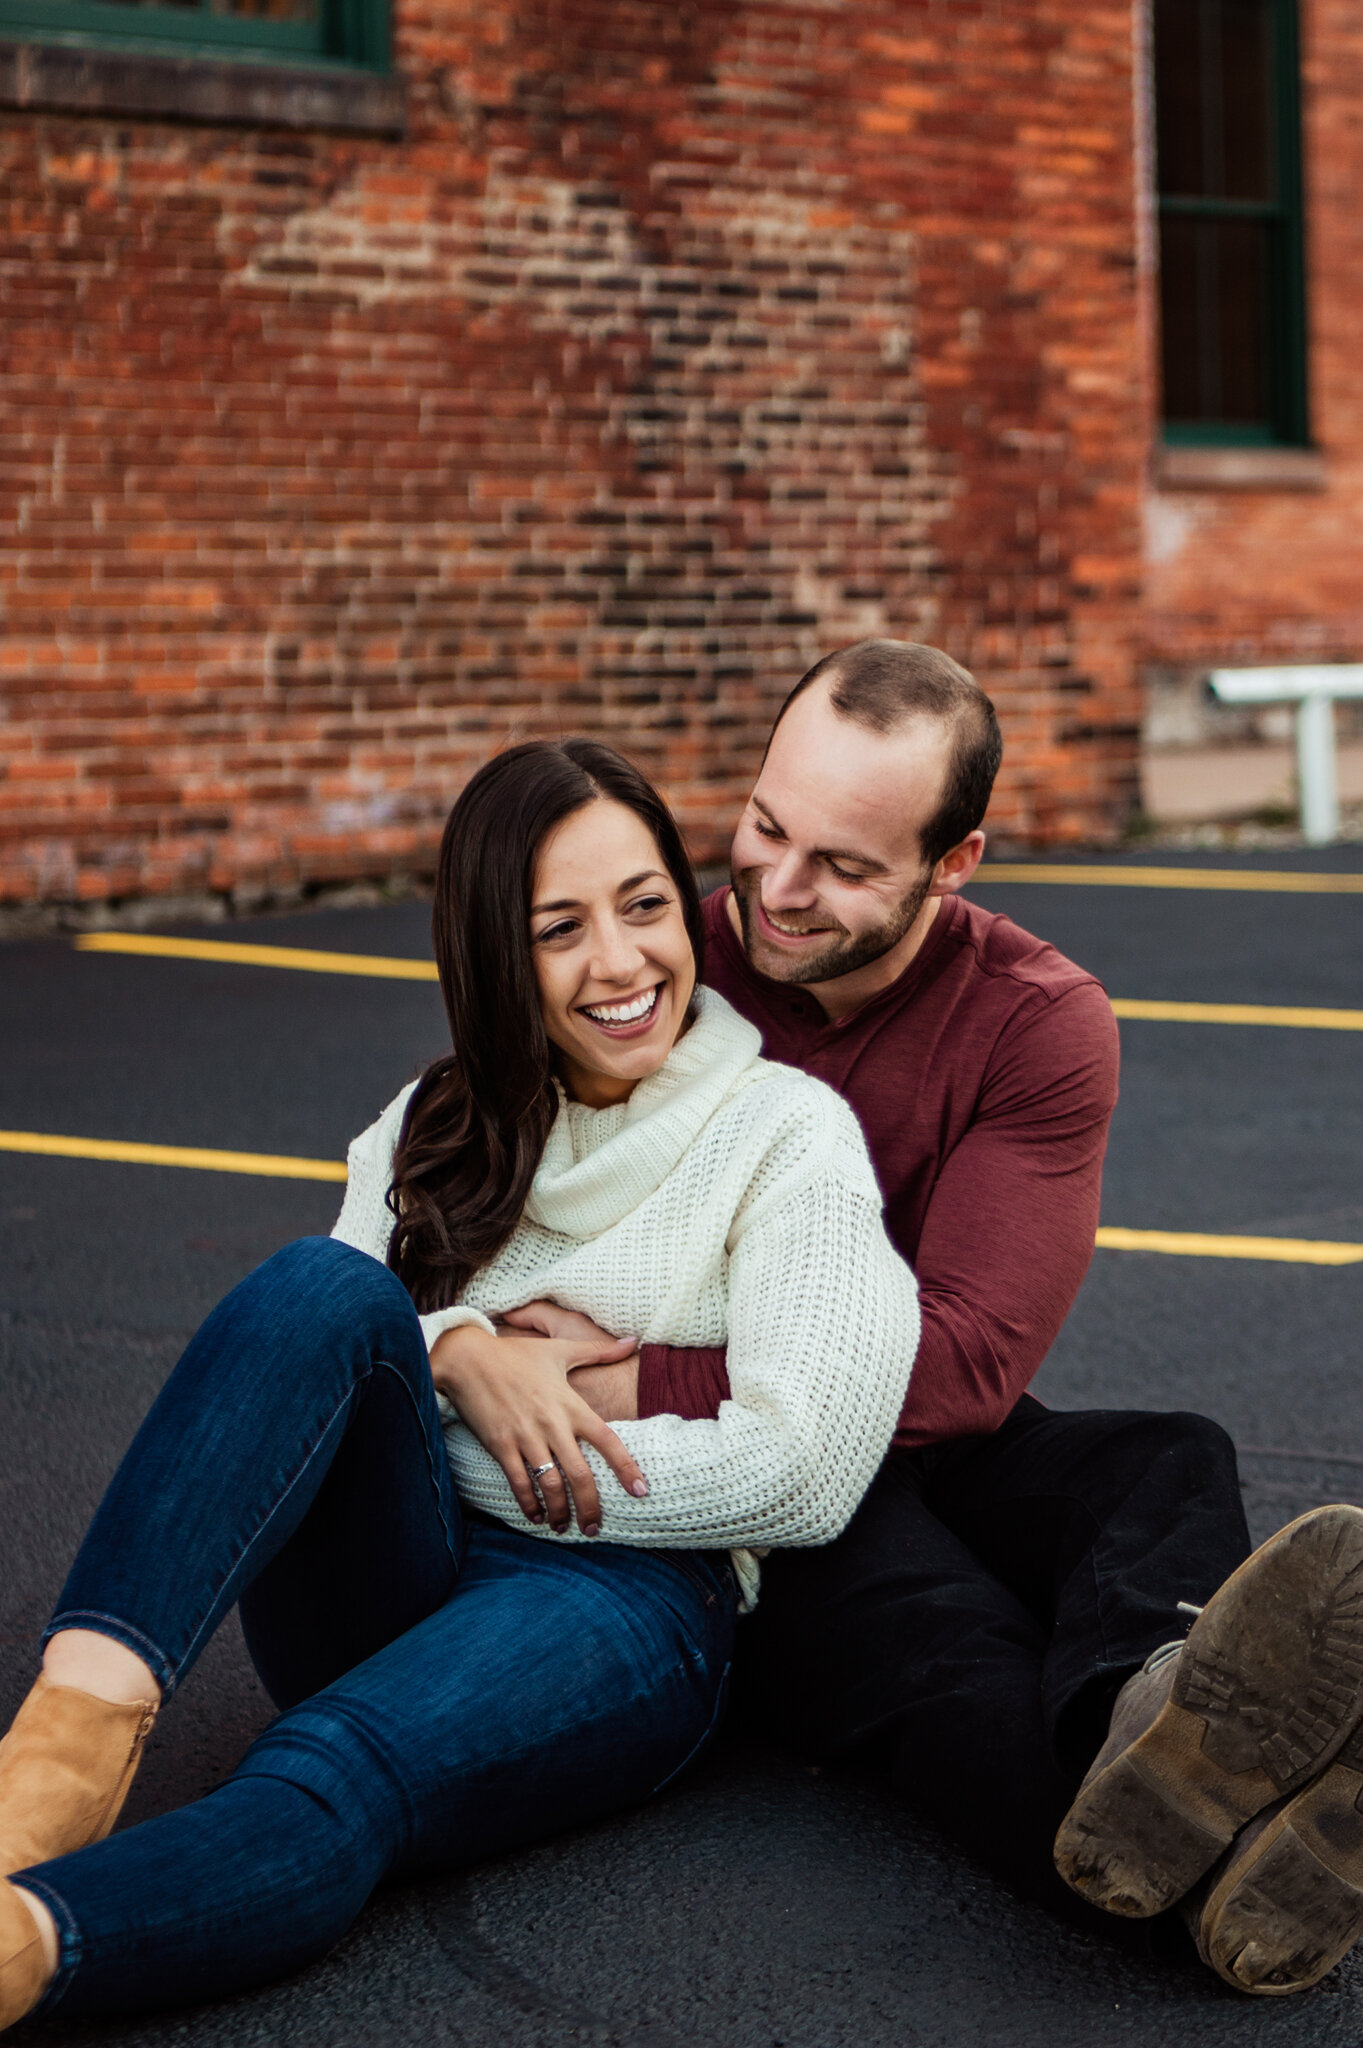 Genesee_Valley_Club_High_Falls_Rochester_Engagement_Session_JILL_STUDIO_Rochester_NY_Photographer_1401.jpg